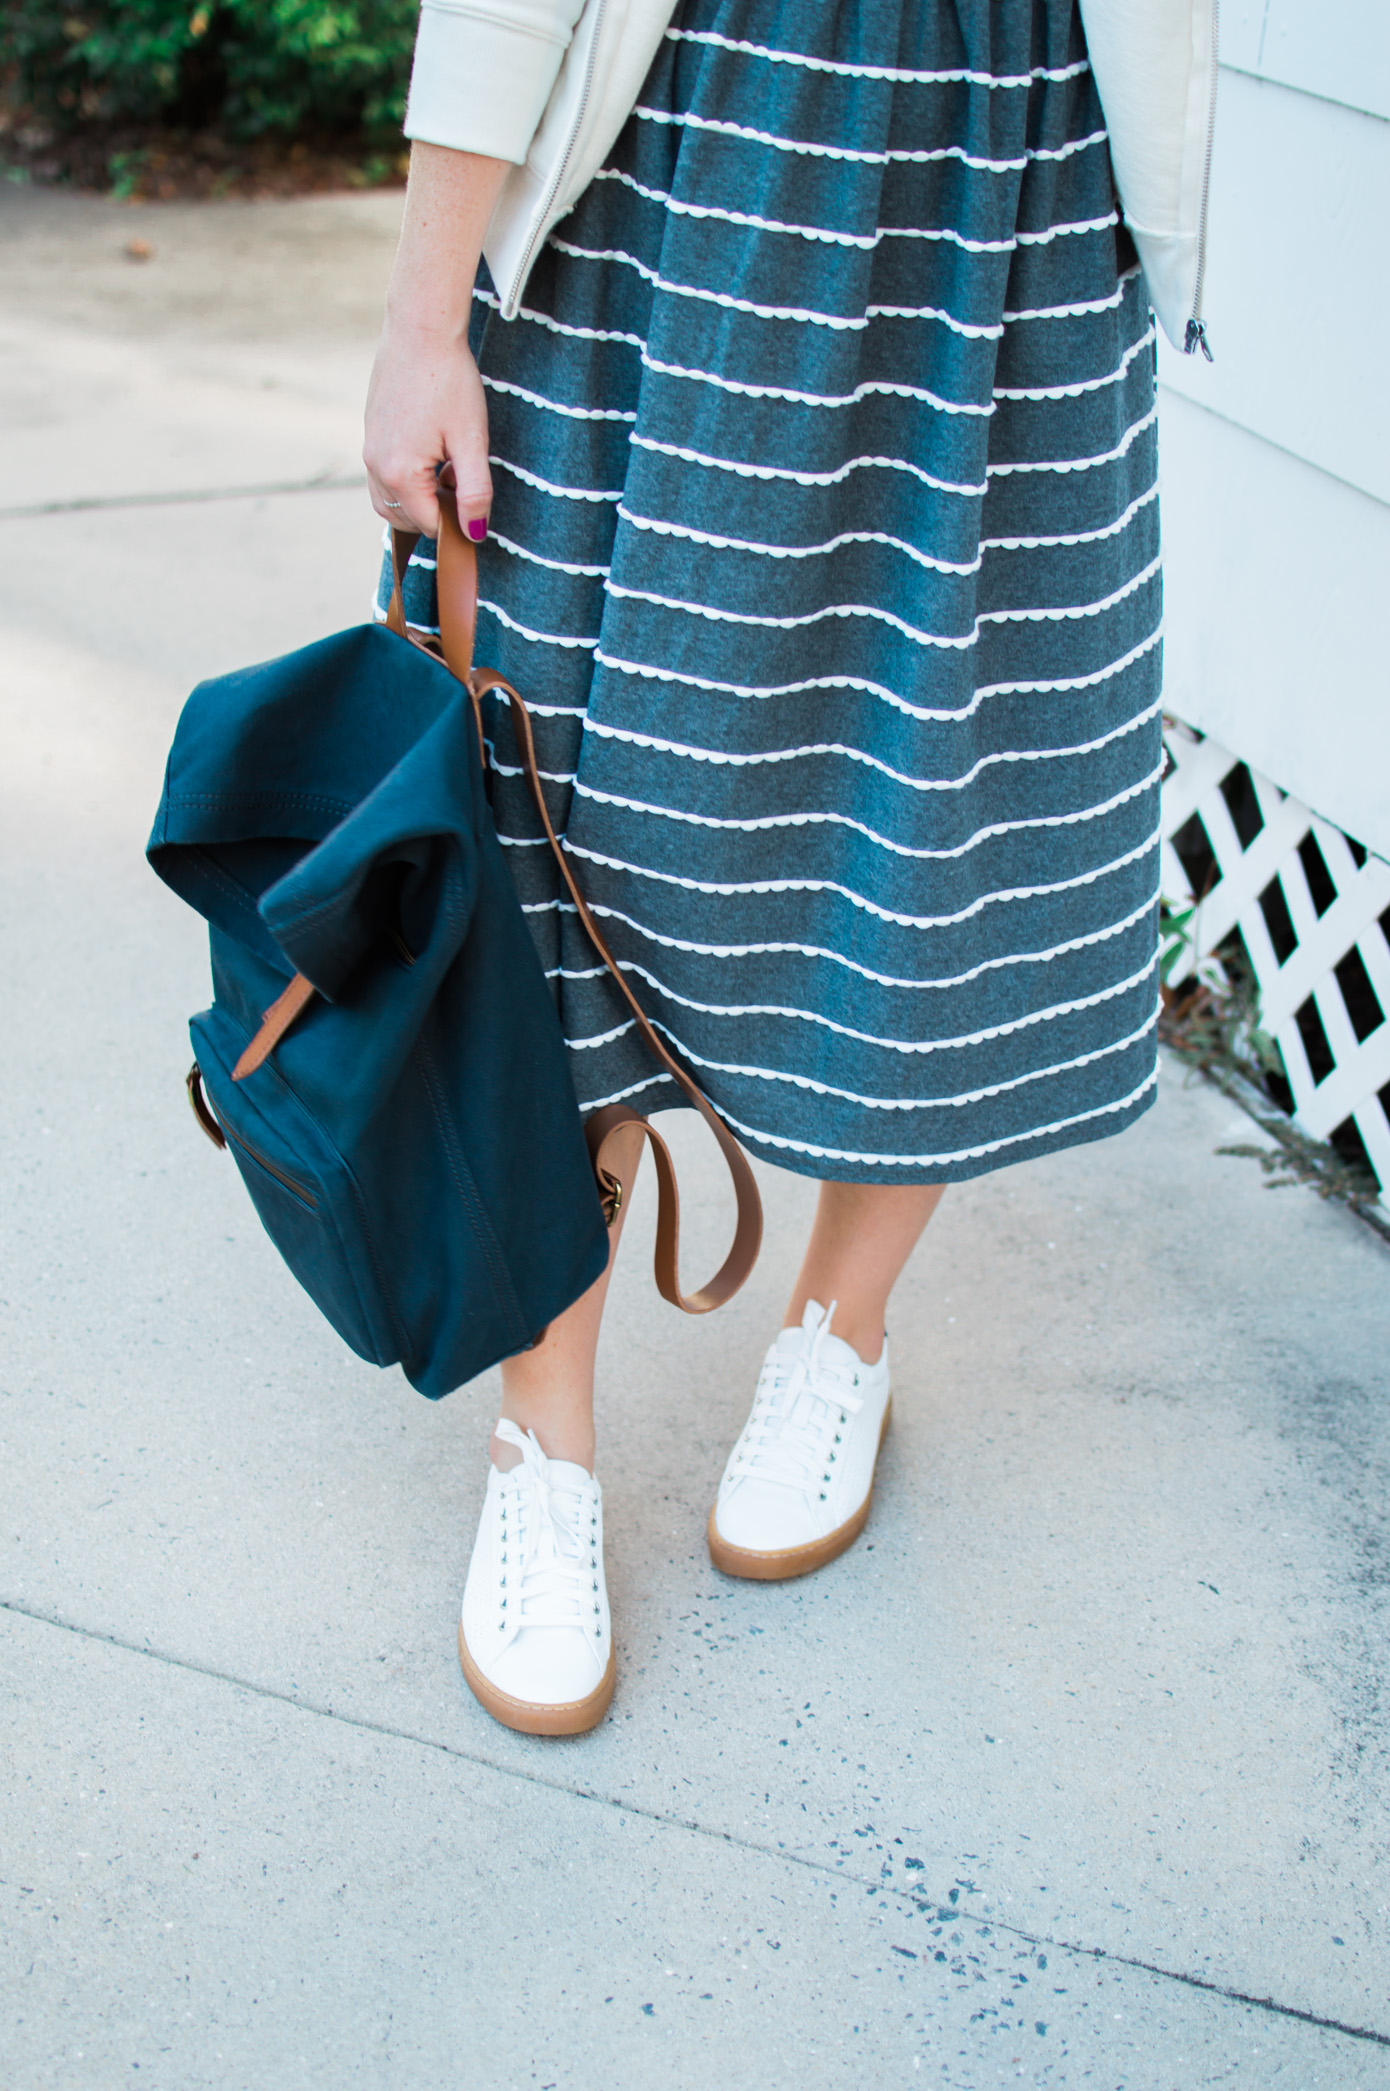 Casual Stripe Midi Dress for Fall | Casual Fall Travel Style | Louella Reese Life & Style Blog